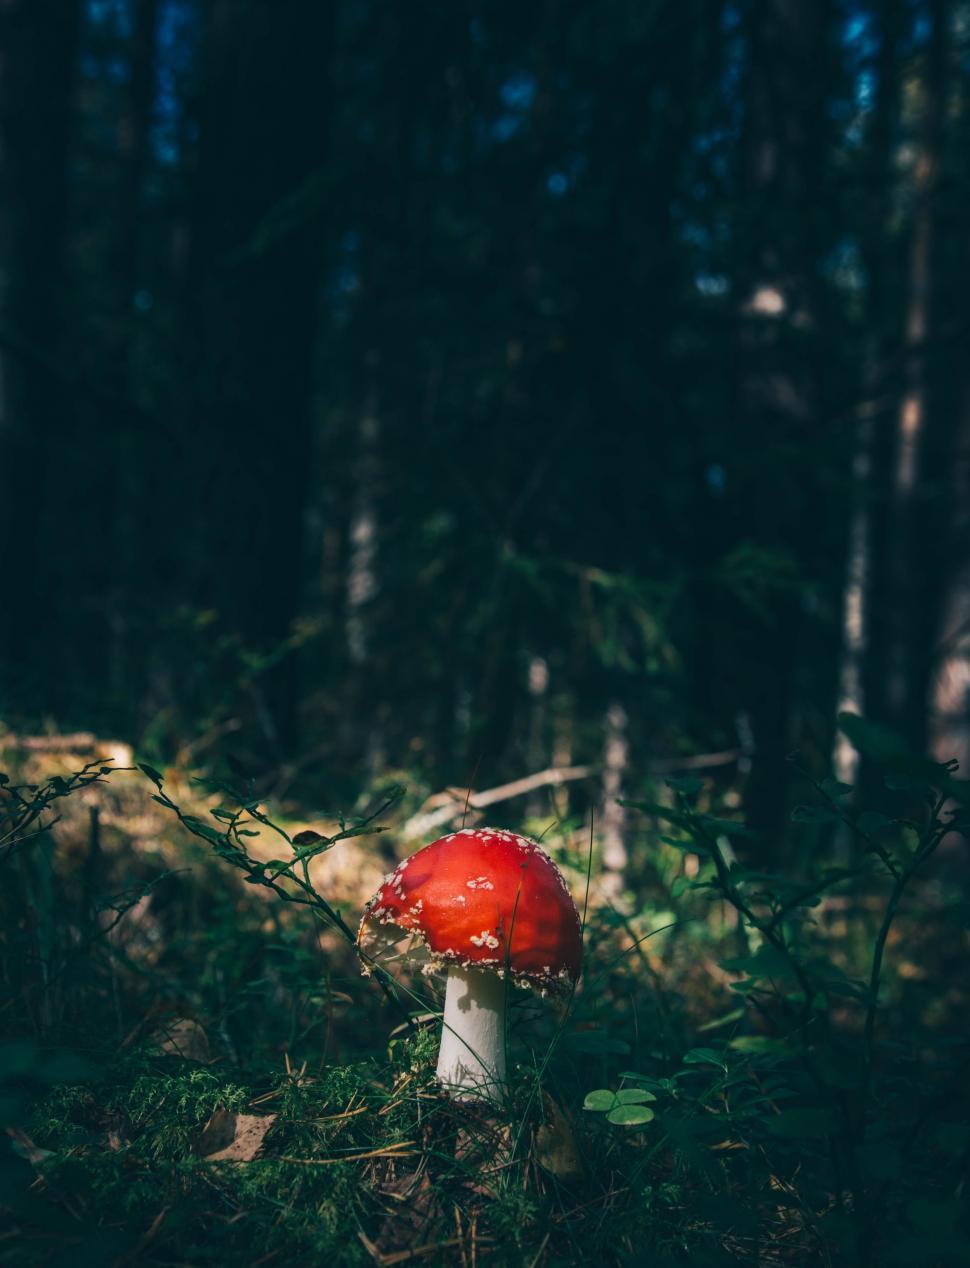 Free Image of Red Mushroom Nestled in Forest Setting 